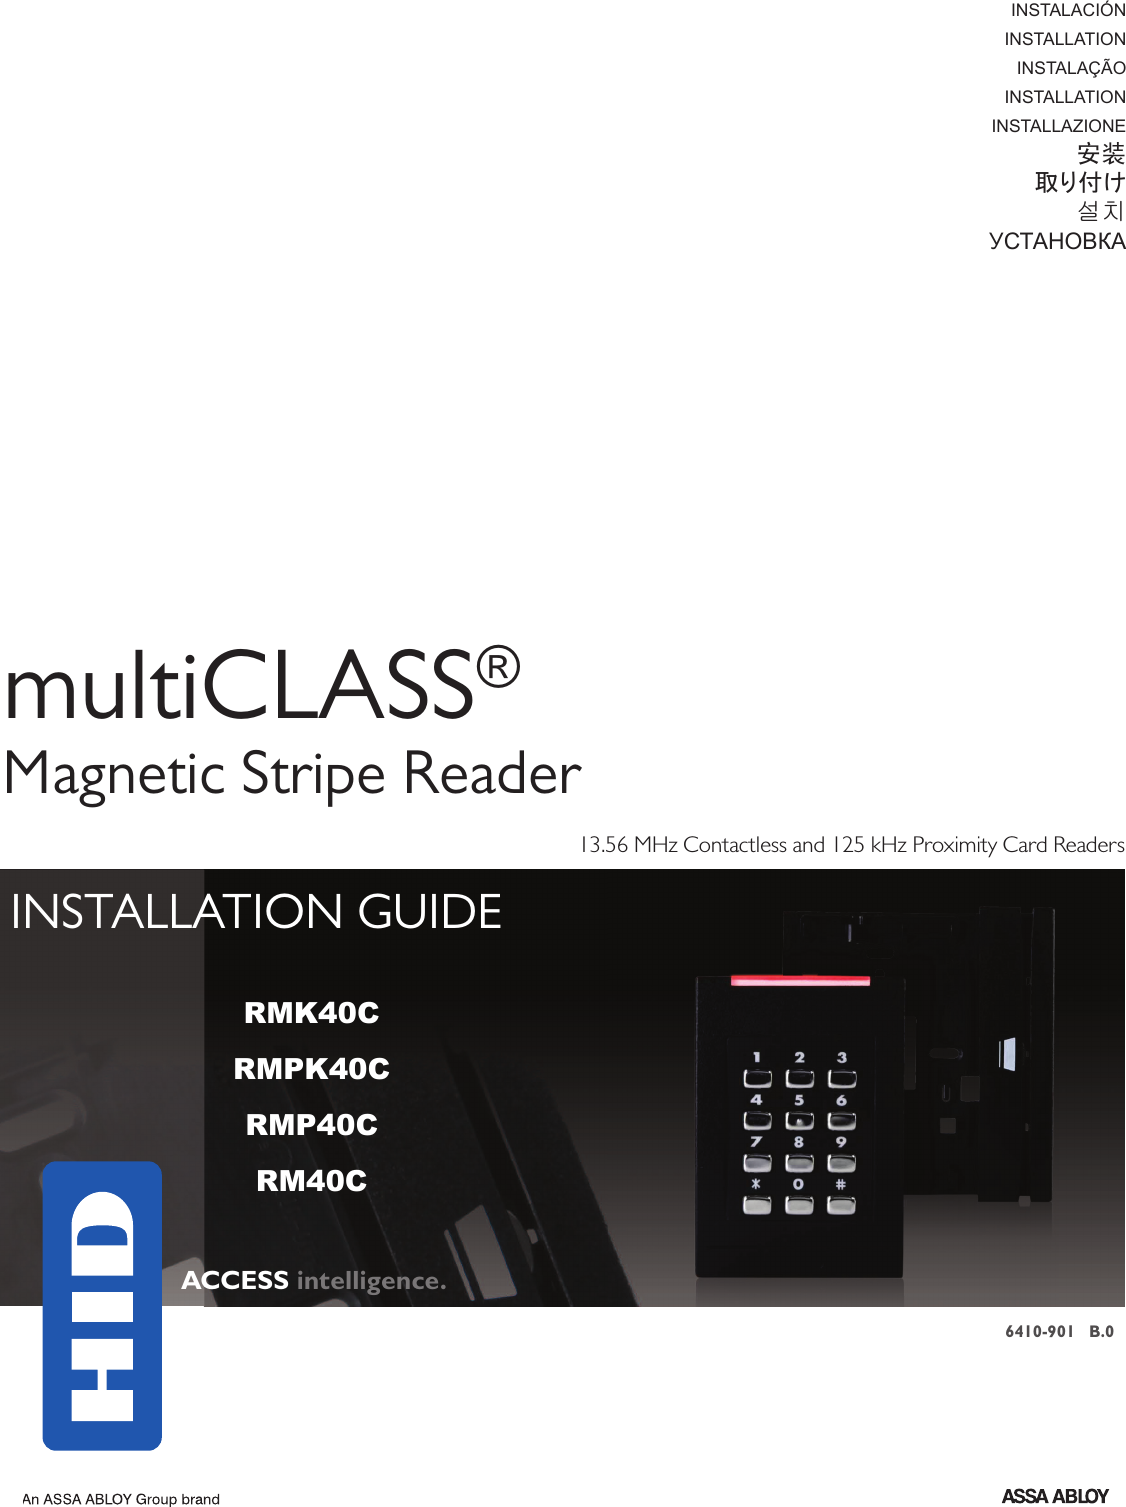 multiCLASS®Magnetic Stripe ReaderACCESS intelligence.ACd Readers INSTALLATION GUIDEinstalacióninstallationinstalaçãoinstallationinstallazione安装取り付け설치УСТАНОВКАRMK40CRMPK40CRMP40CRM40C13.56 MHz Contactless and 125 kHz Proximity Card Readers6410-901   B.0